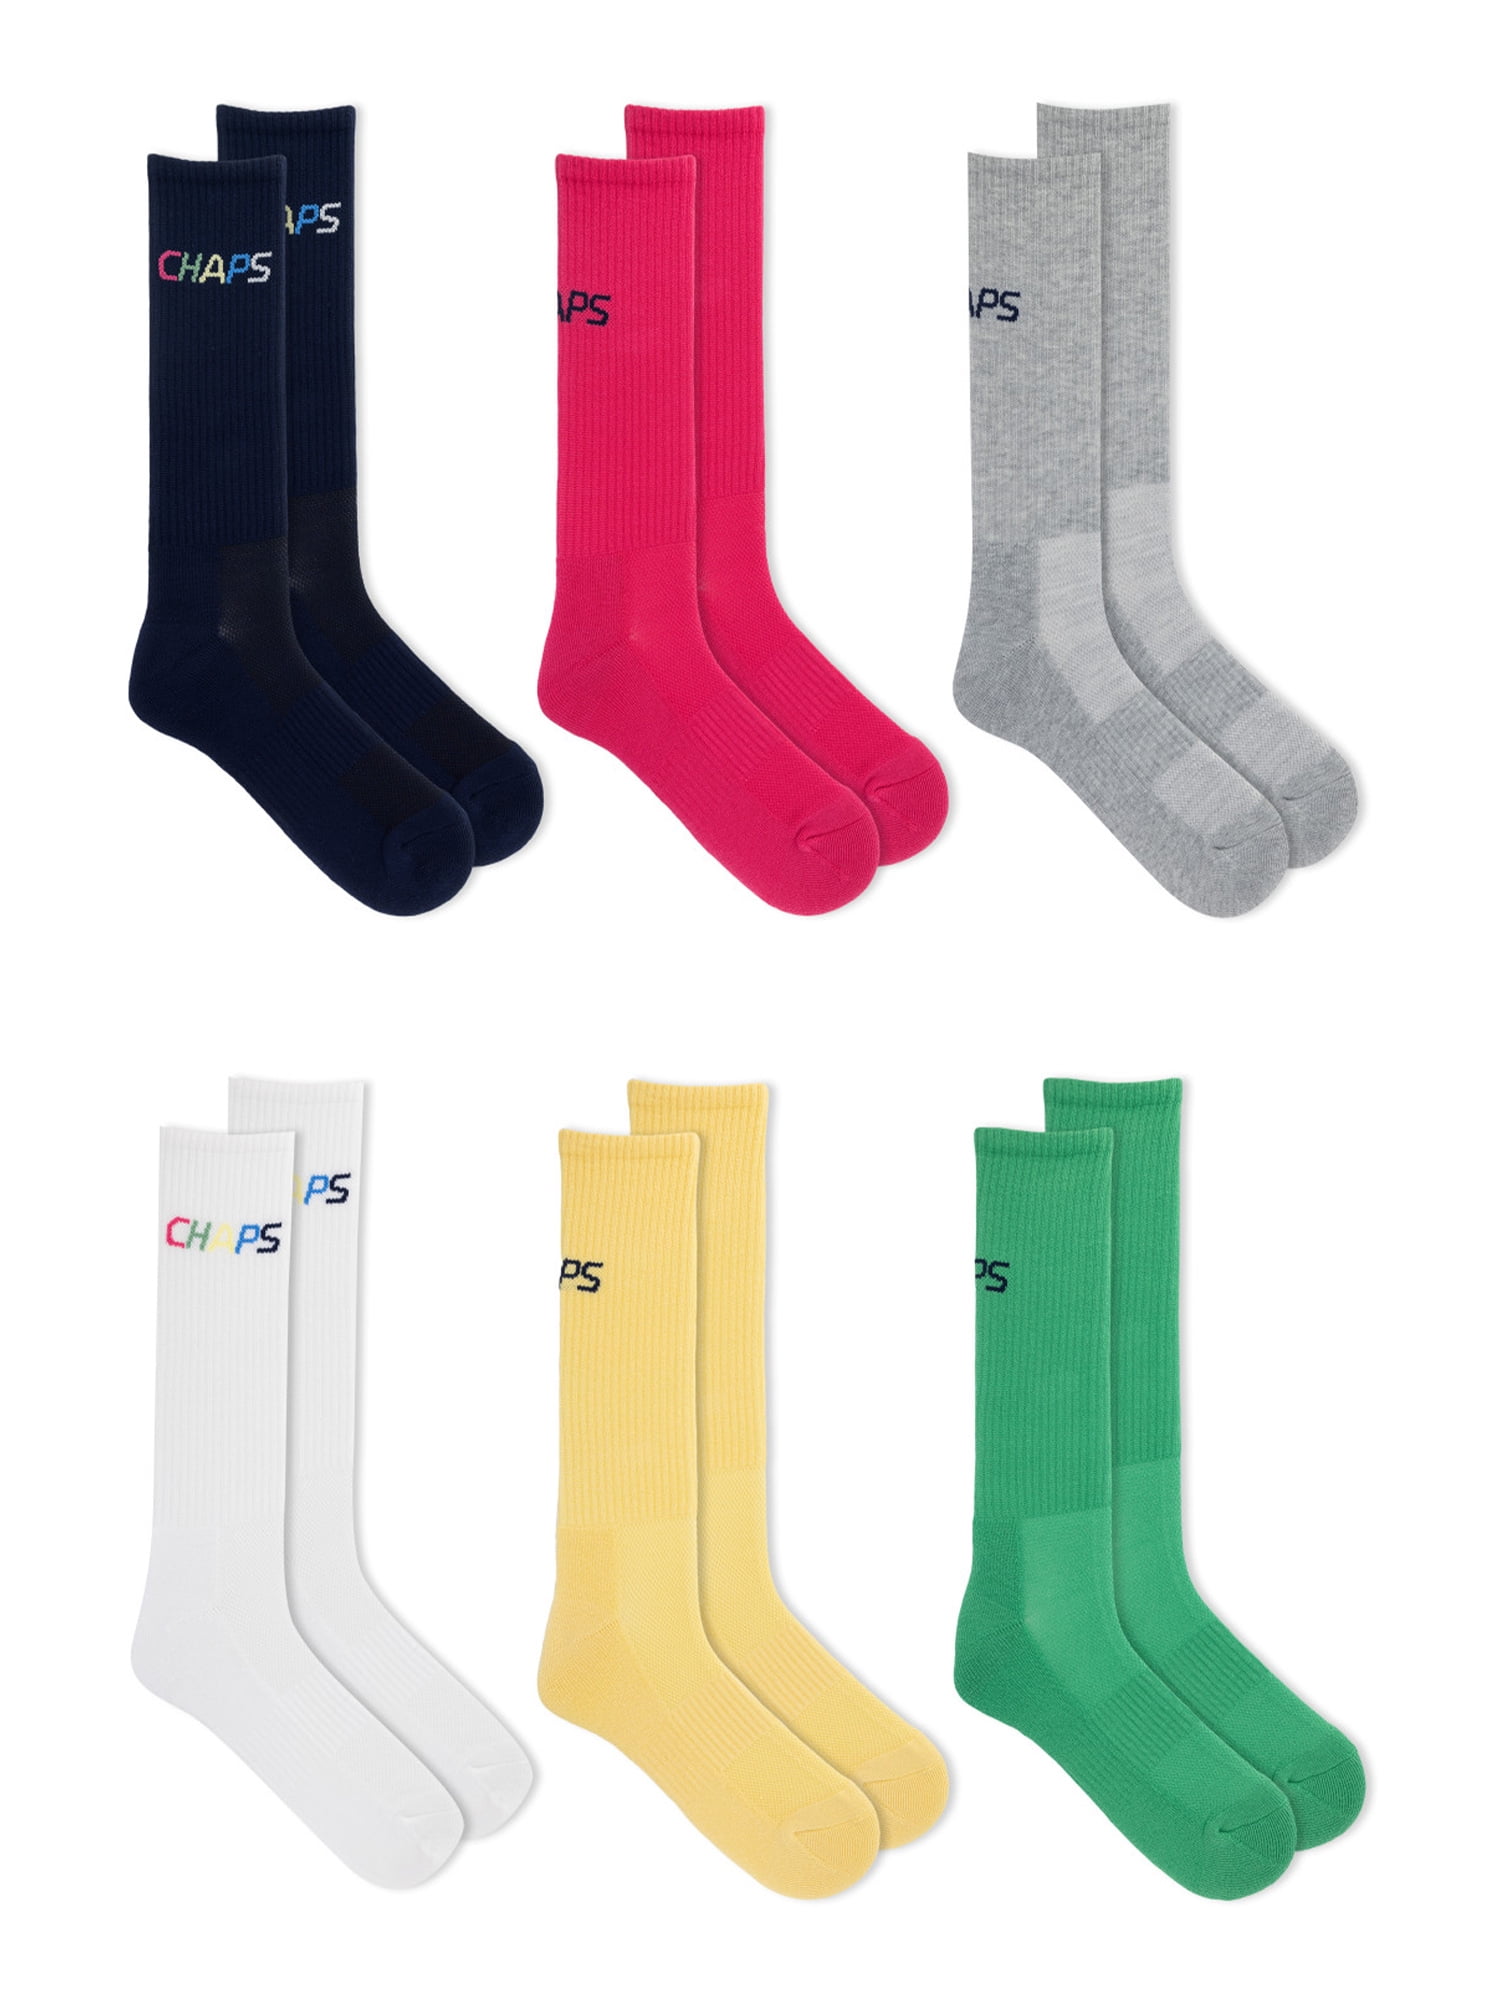 Giftcraft 410010 Mens Crew Sock Multi Color Design - Pack of 3 